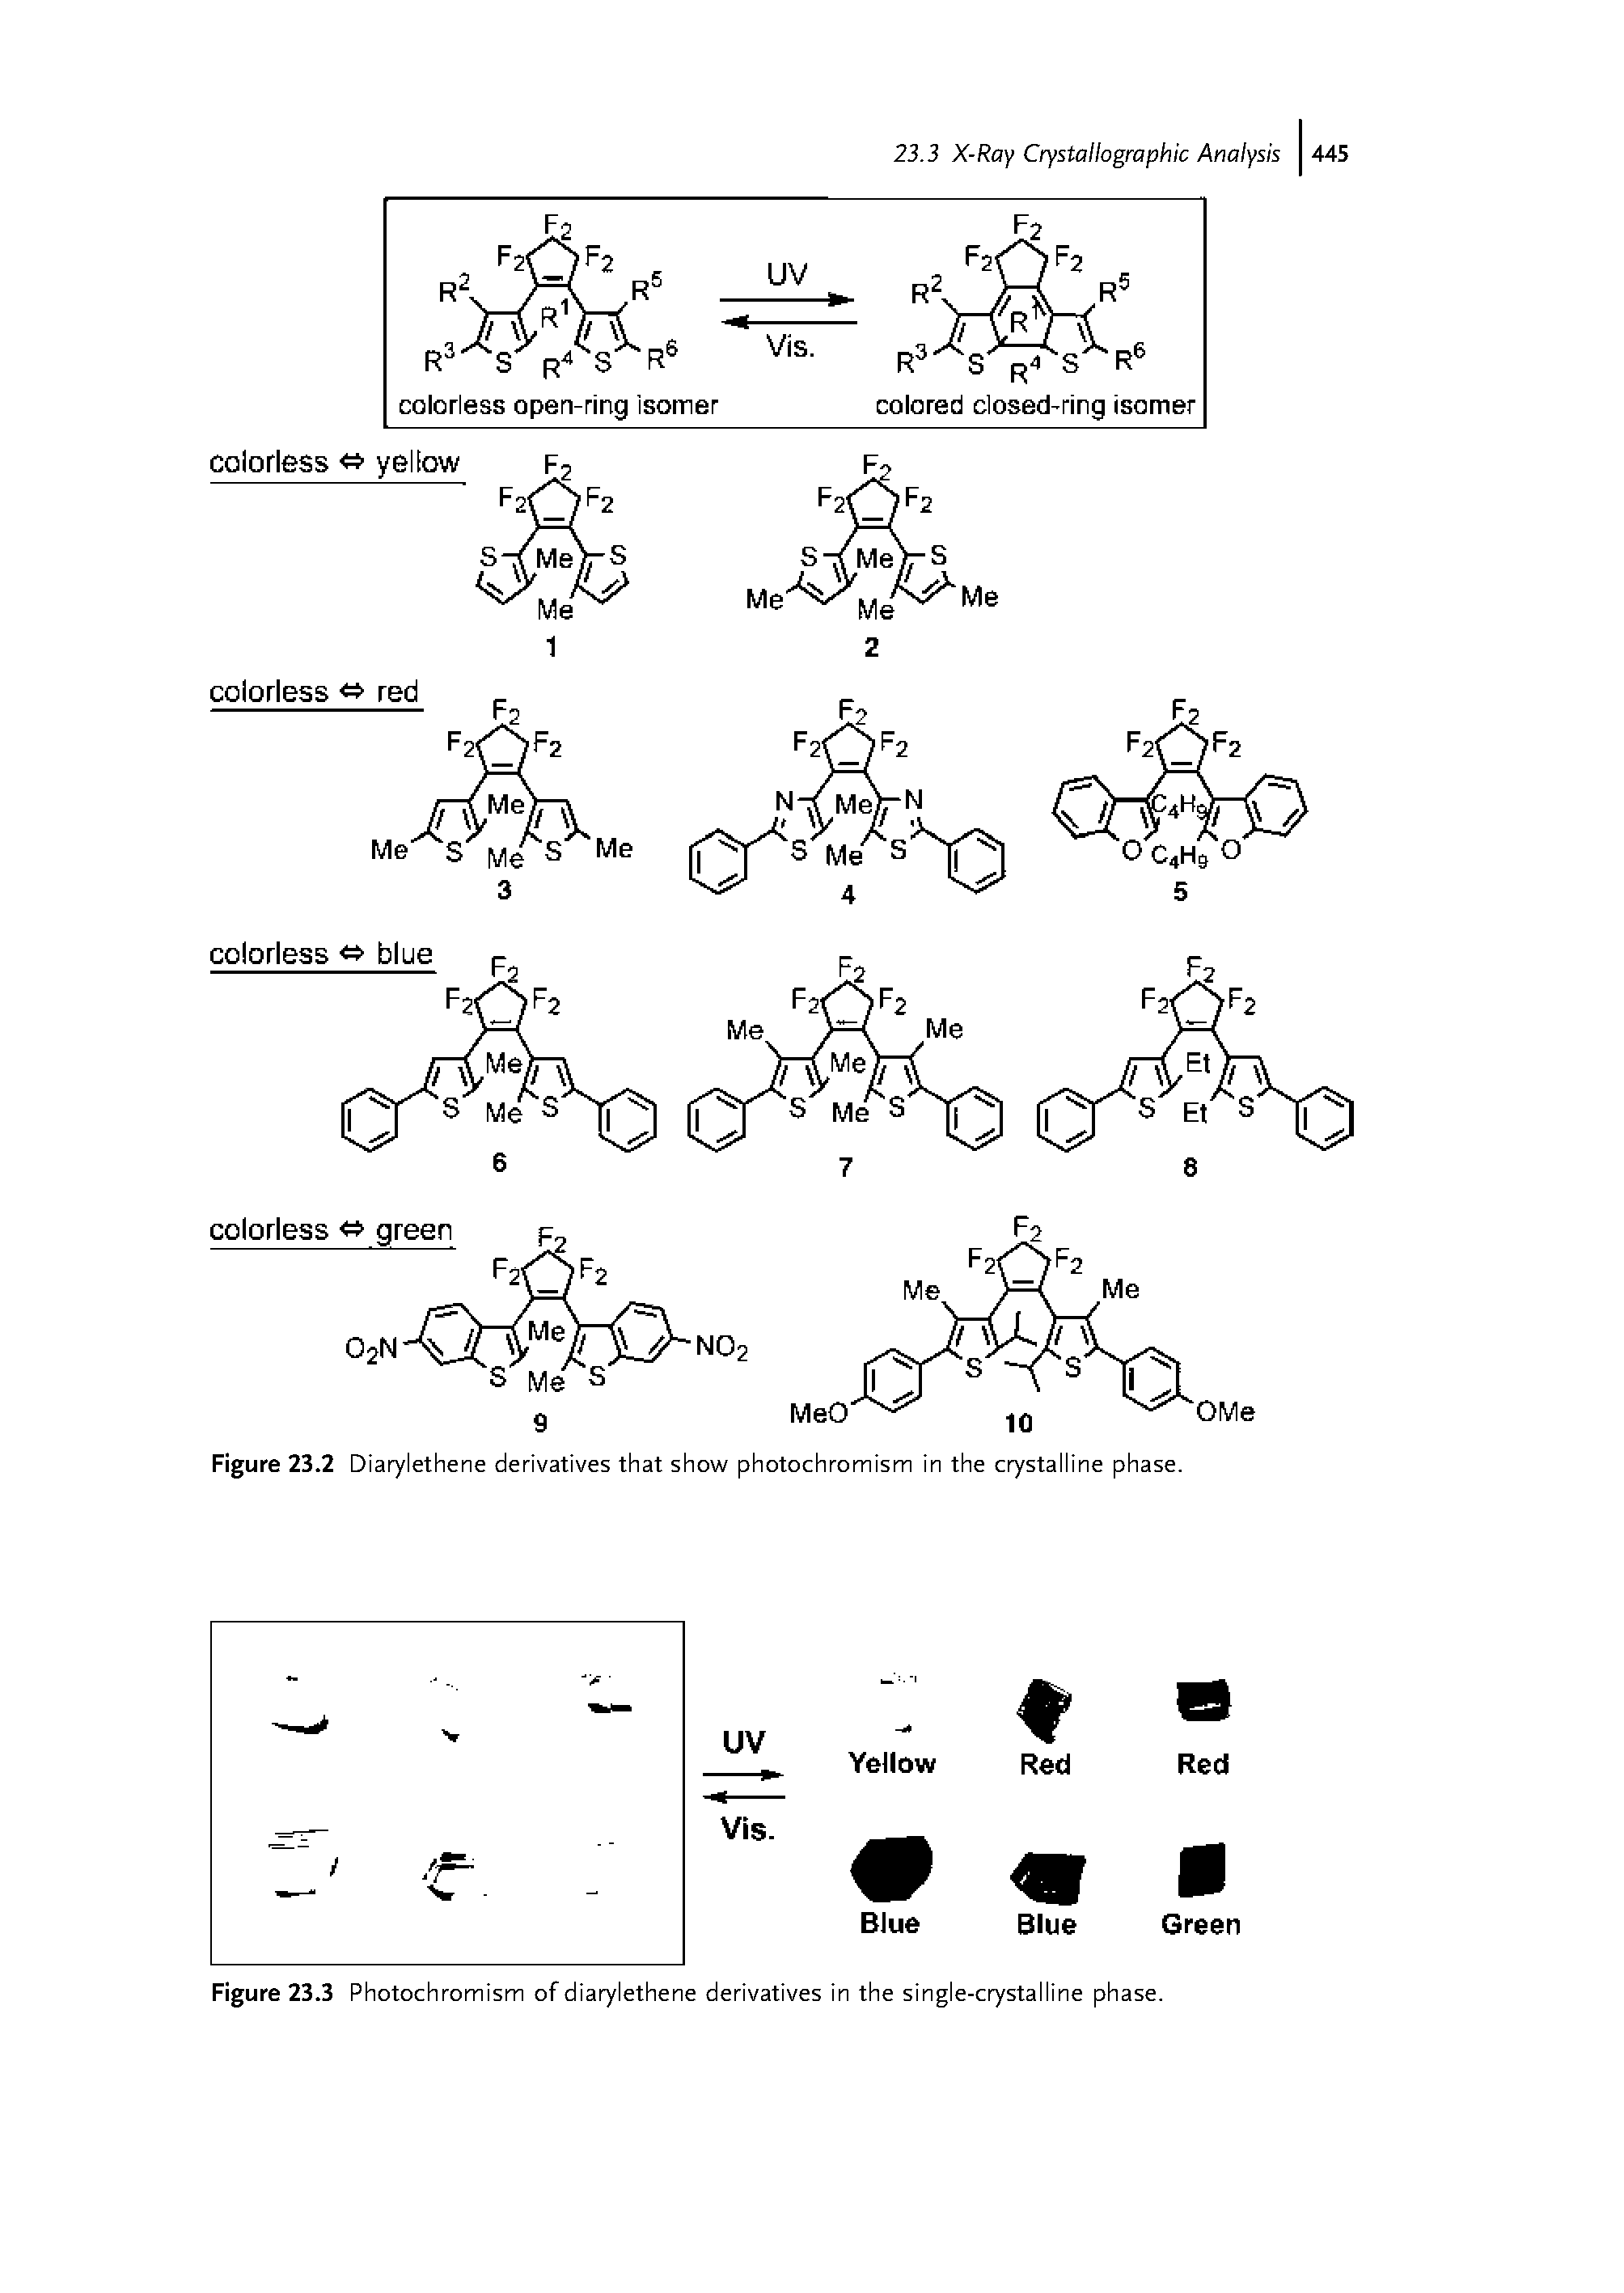 Figure 23.3 Photochromism of diarylethene derivatives in the single-crystalline phase.